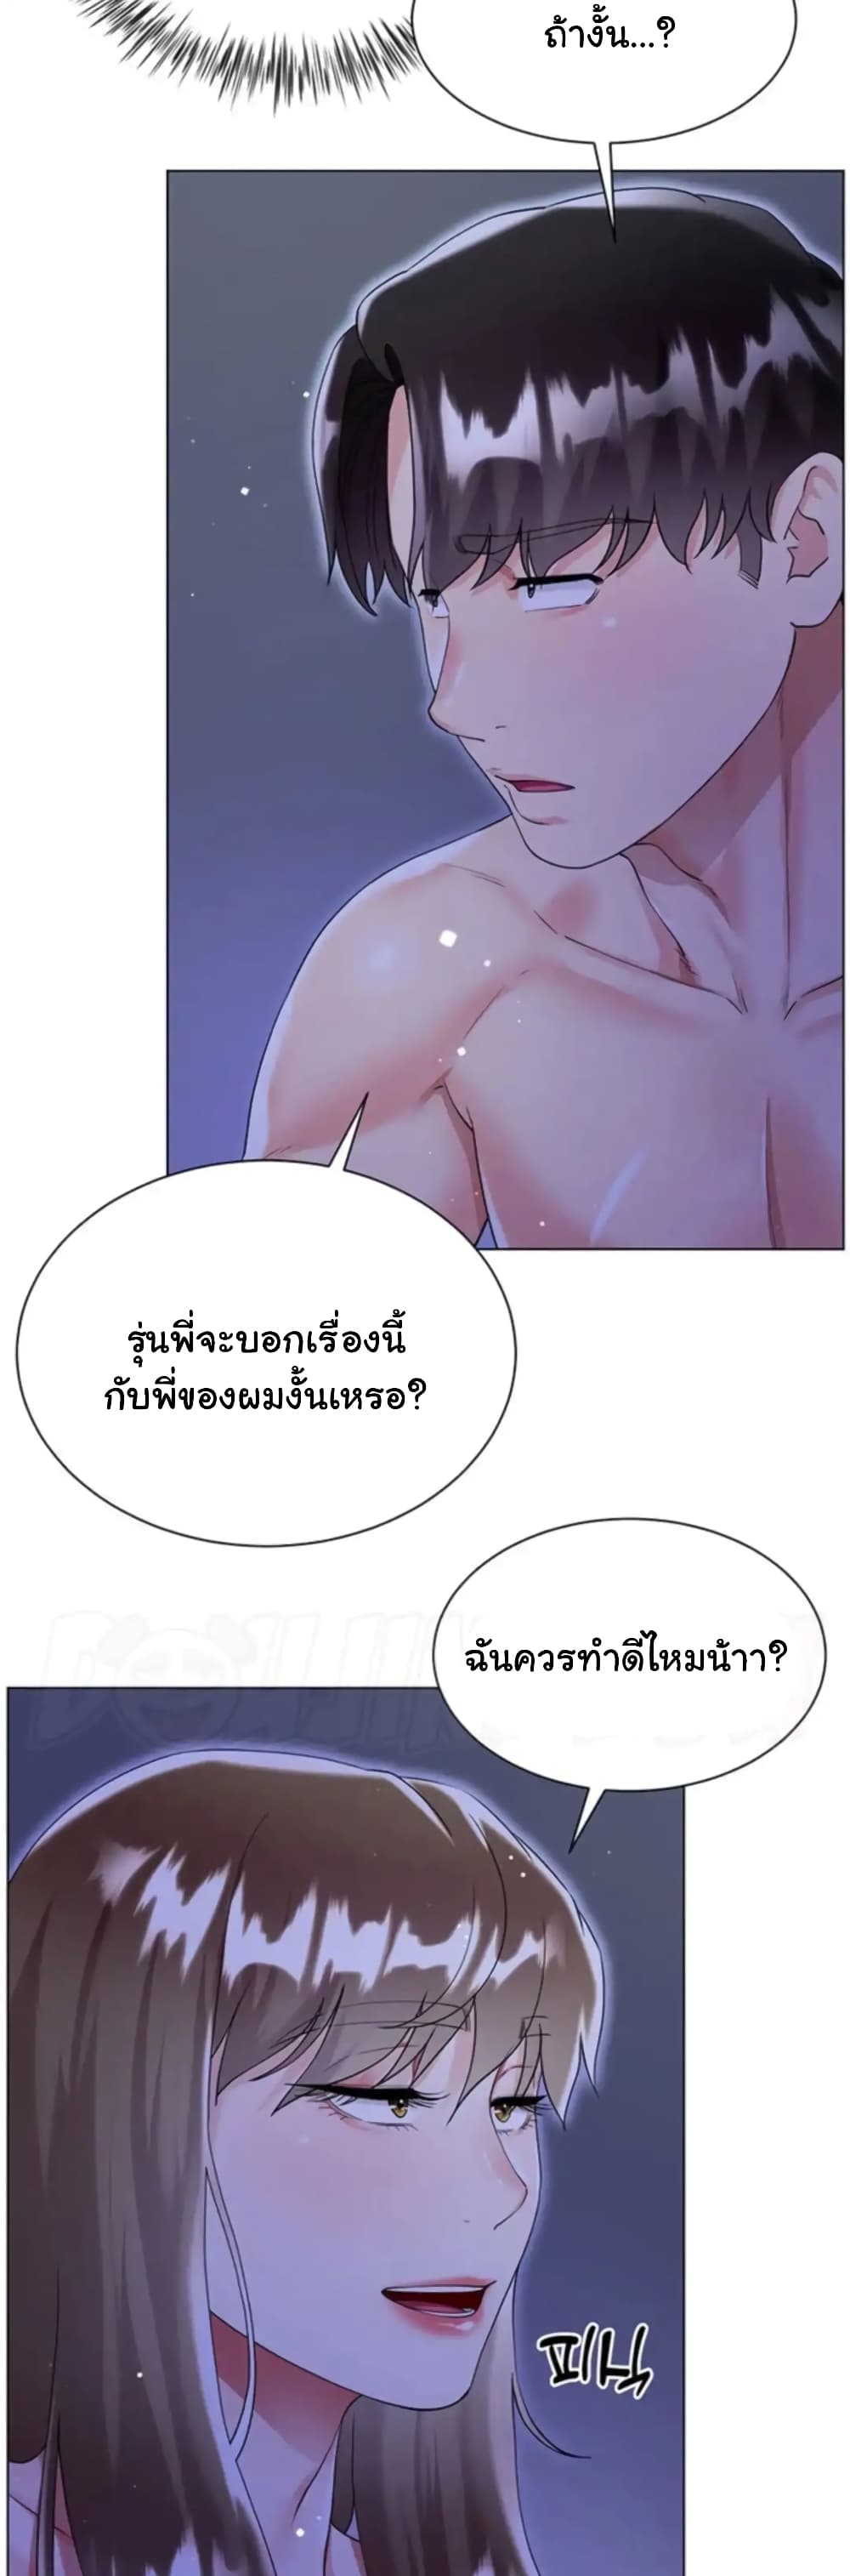 My Sister-in-law’s Skirt 42 ภาพที่ 12